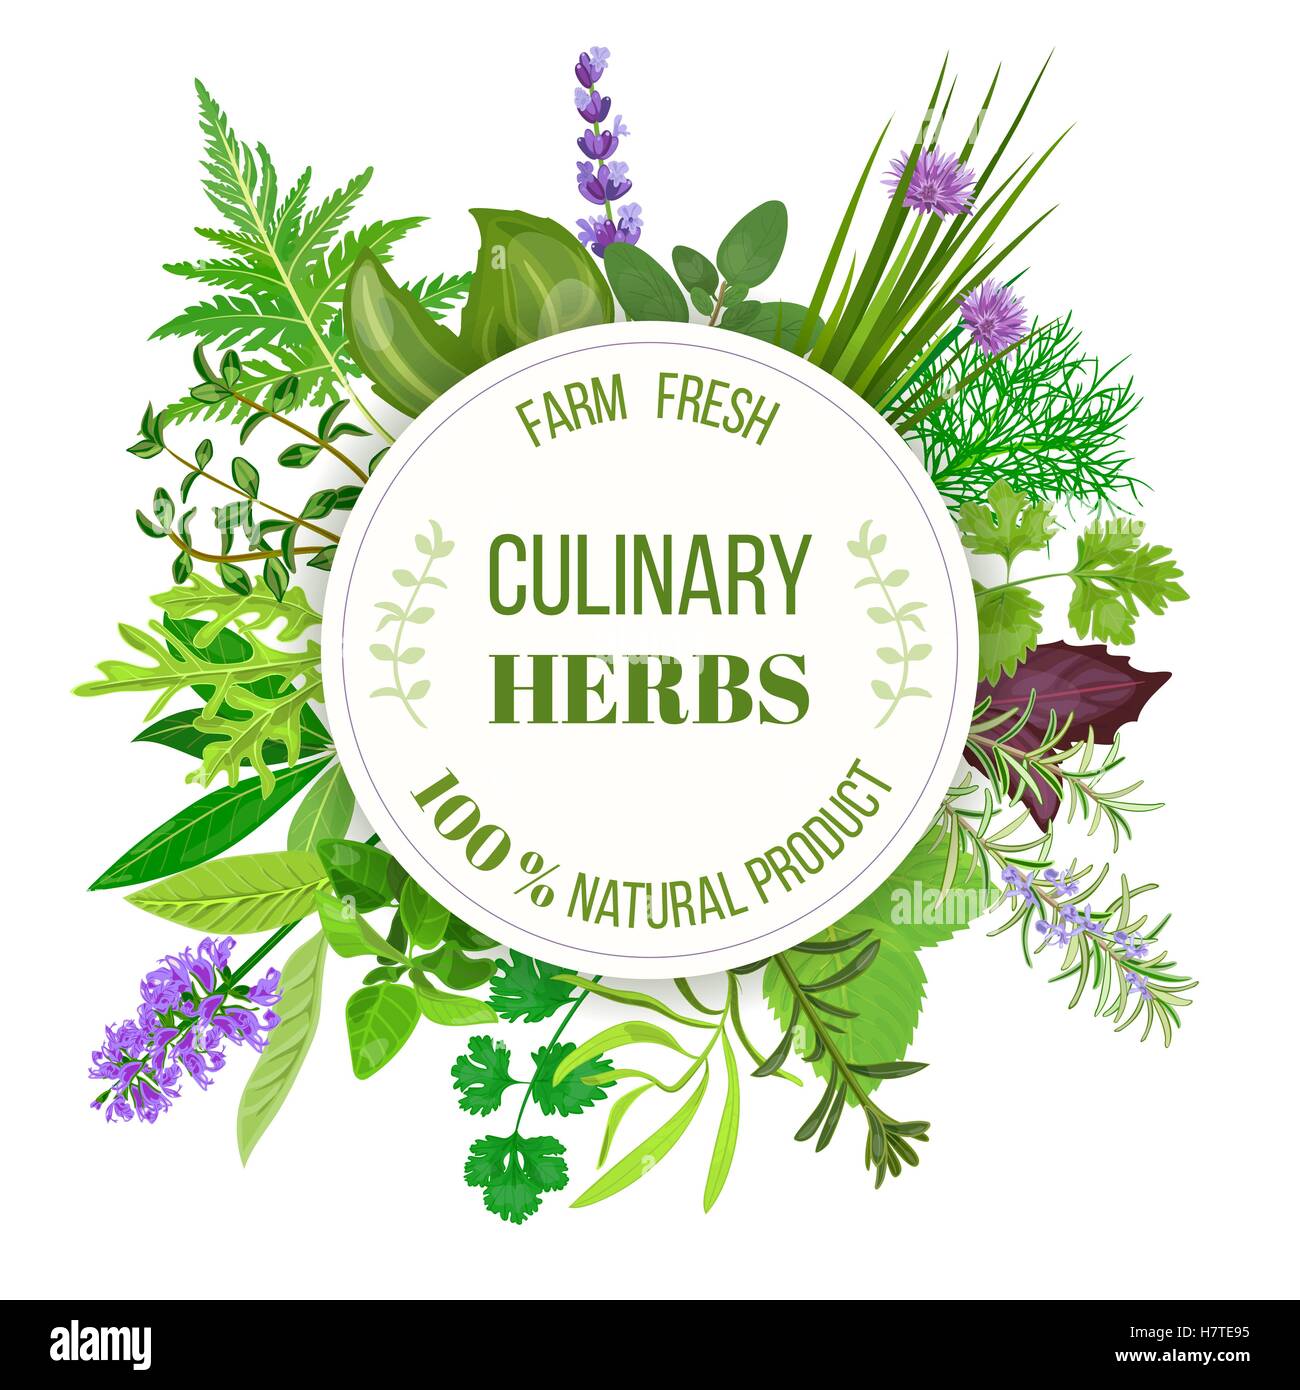 Culinary herbs round emblem Stock Vector